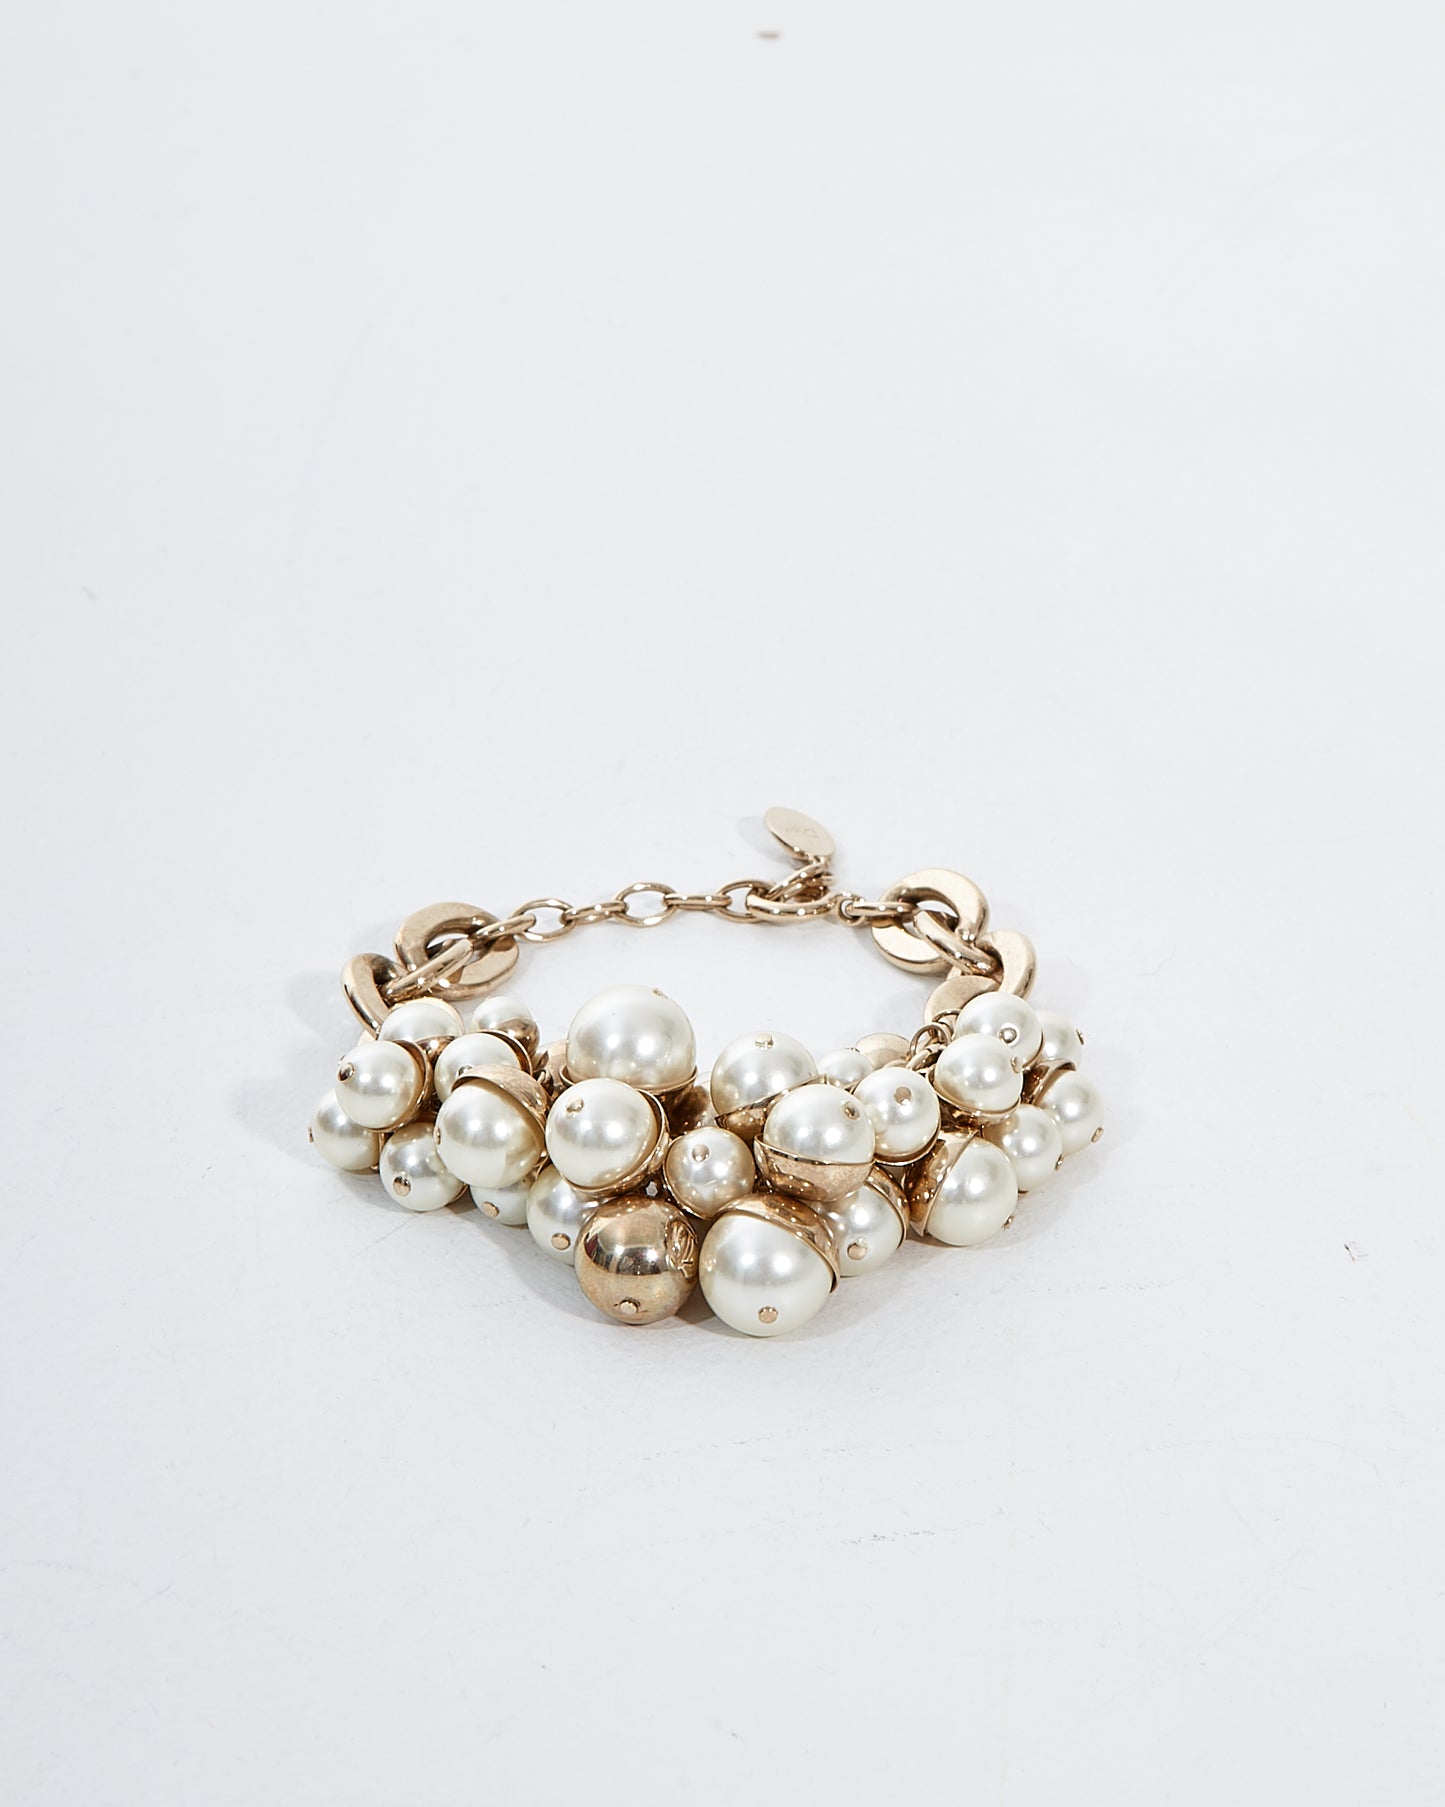 Dior Silver and White Pearl Cluster Bracelet